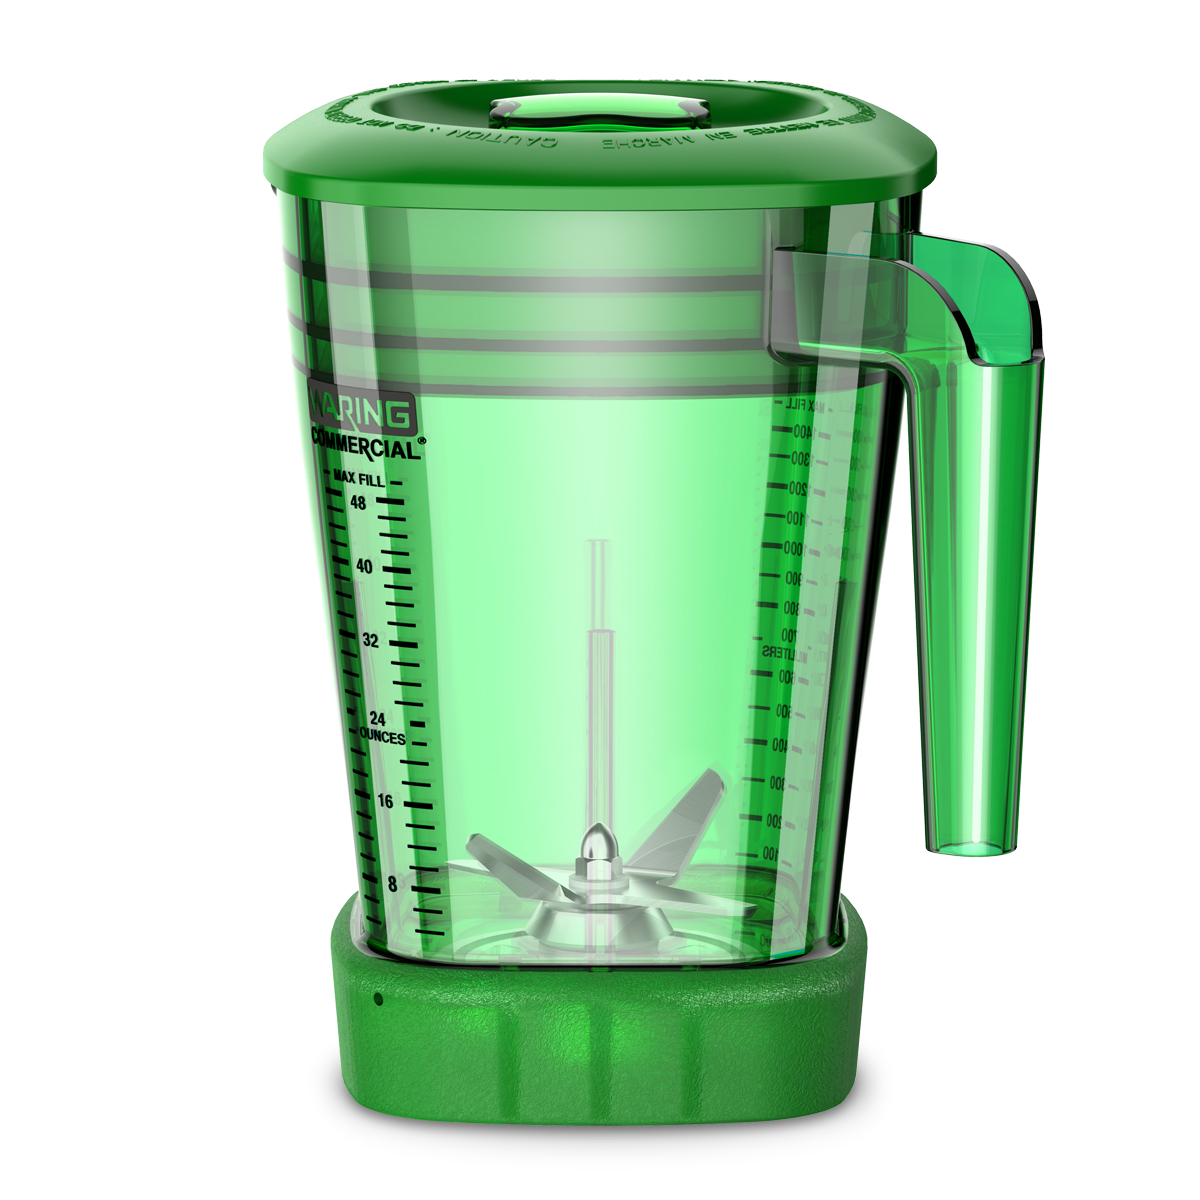 https://www.waringcommercialproducts.com/files/accessories/cac93x12-forty-eight-oz-copolyester-container-green.jpg